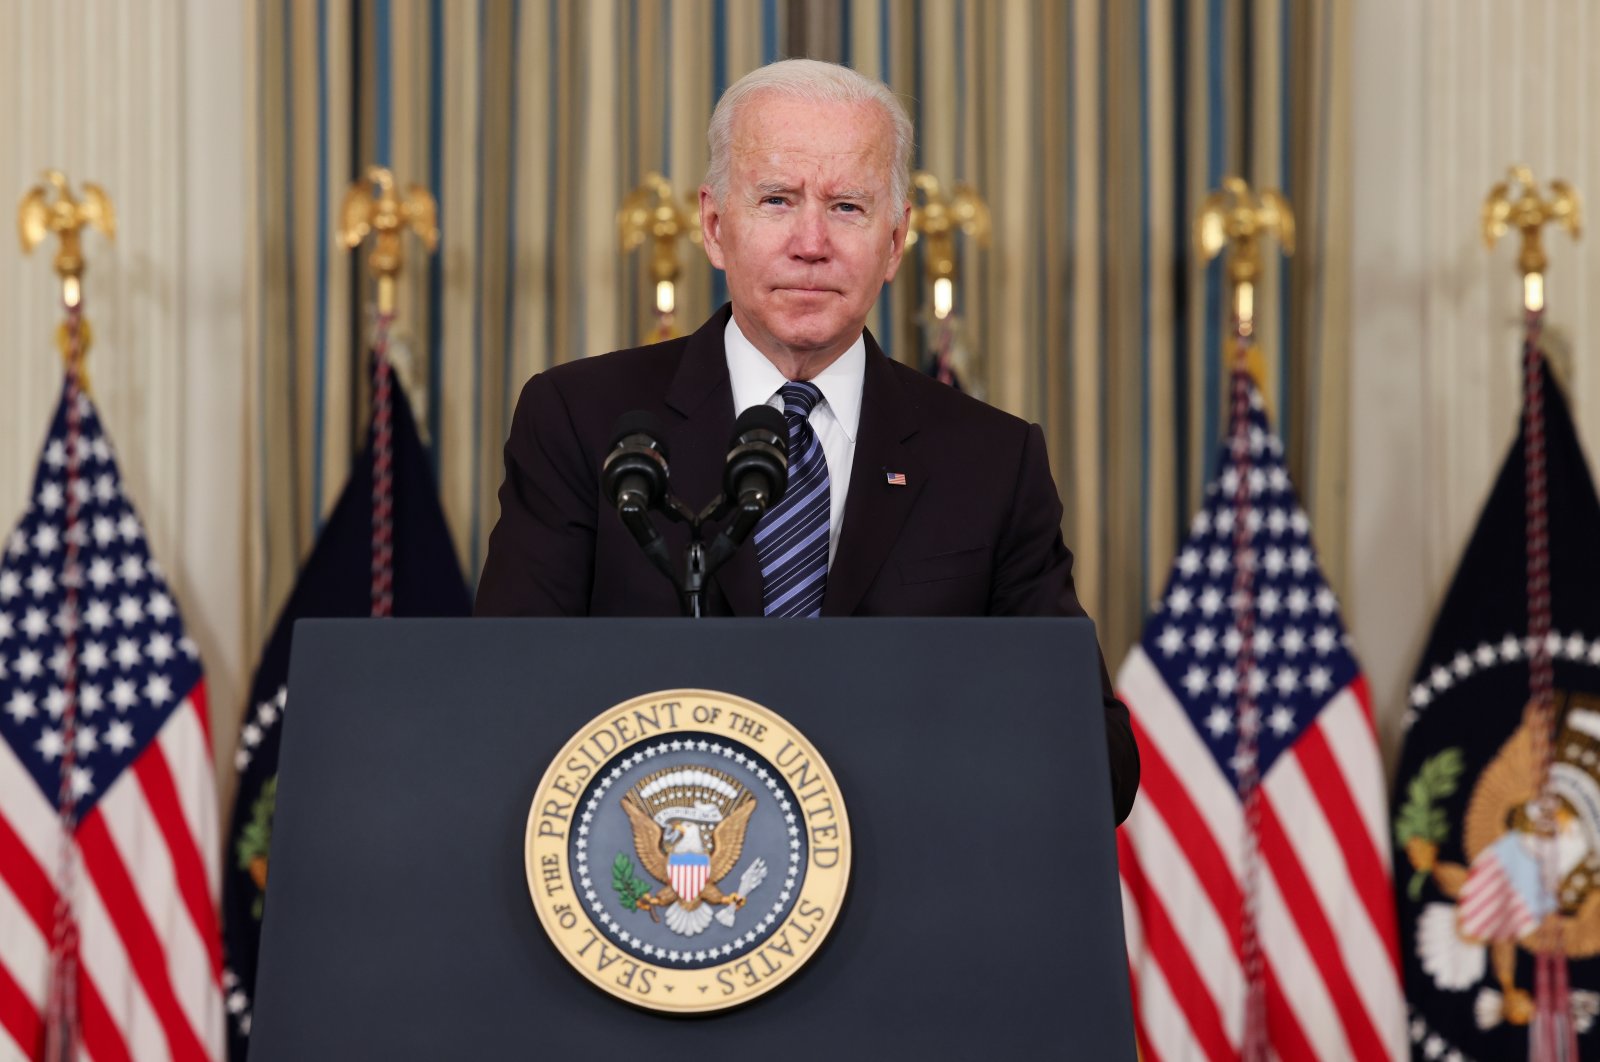 U.S. President Joe Biden looks on as he delivers remarks on the October jobs report at the White House in Washington, D.C., U.S., Nov. 5, 2021. (Reuters Photo)